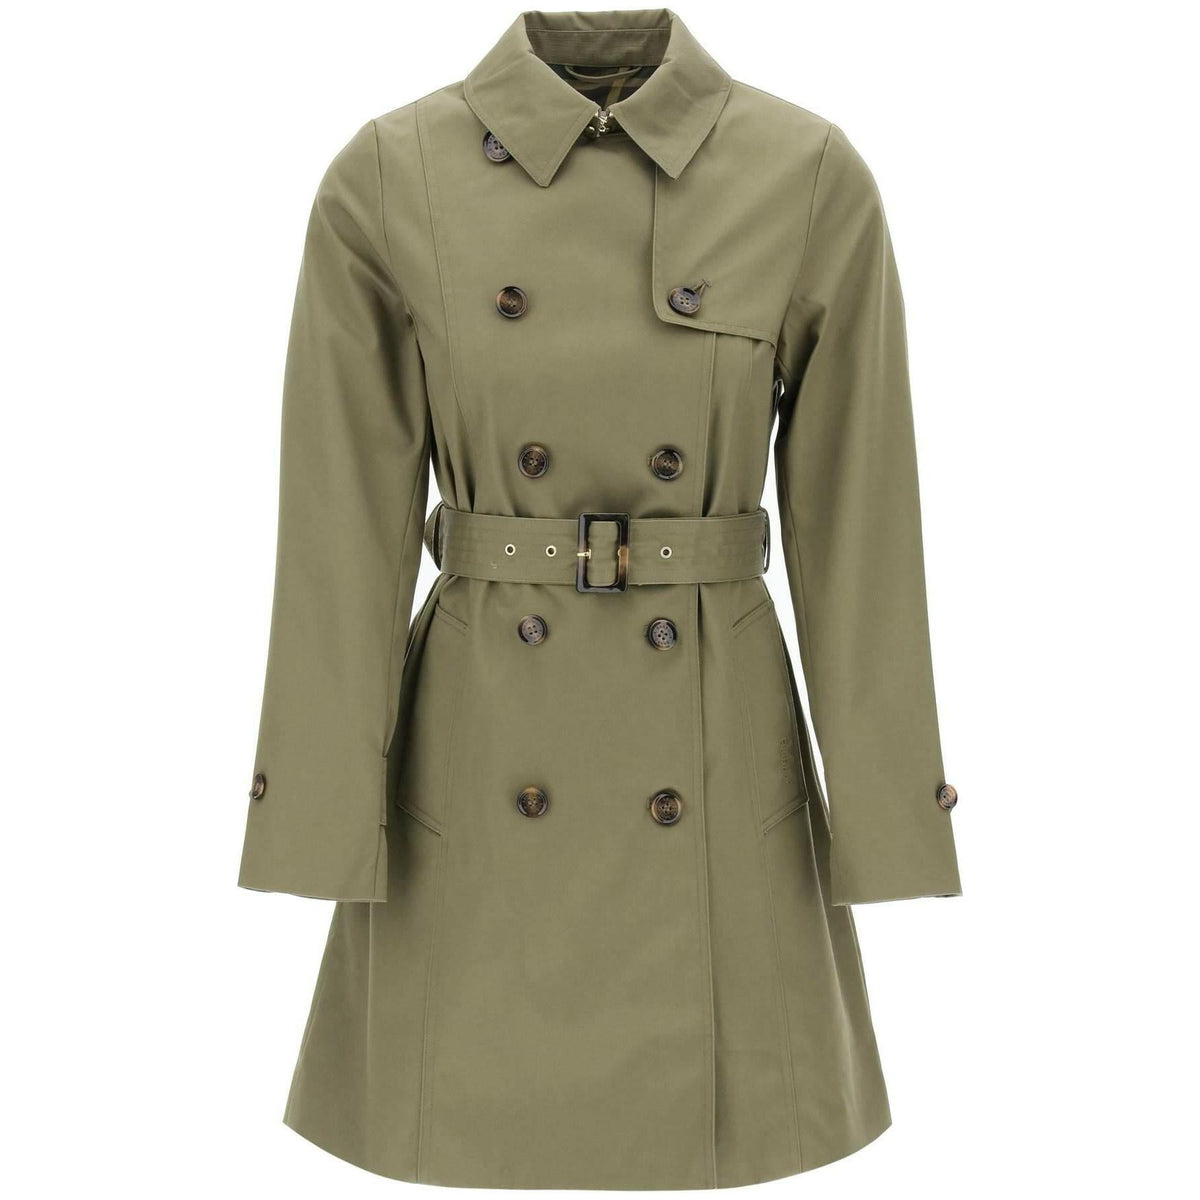 BARBOUR - Double-Breasted Trench Coat - JOHN JULIA